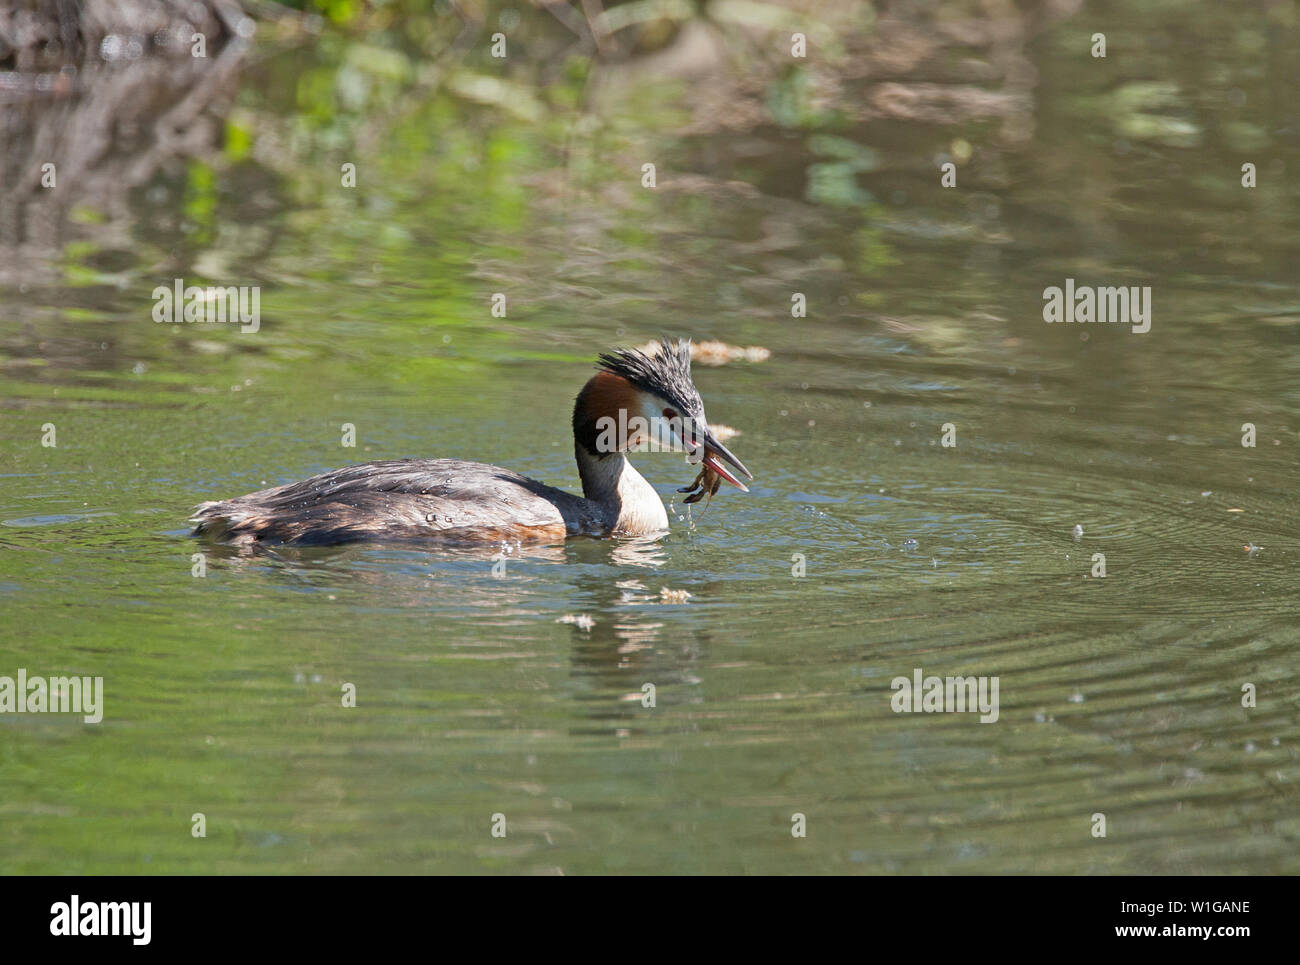 Great-crested Grebe, Podiceps cristatus, single adult holding prey, a crayfish, in bill.  Taken May. Lea Valley, Essex, UK. Stock Photo